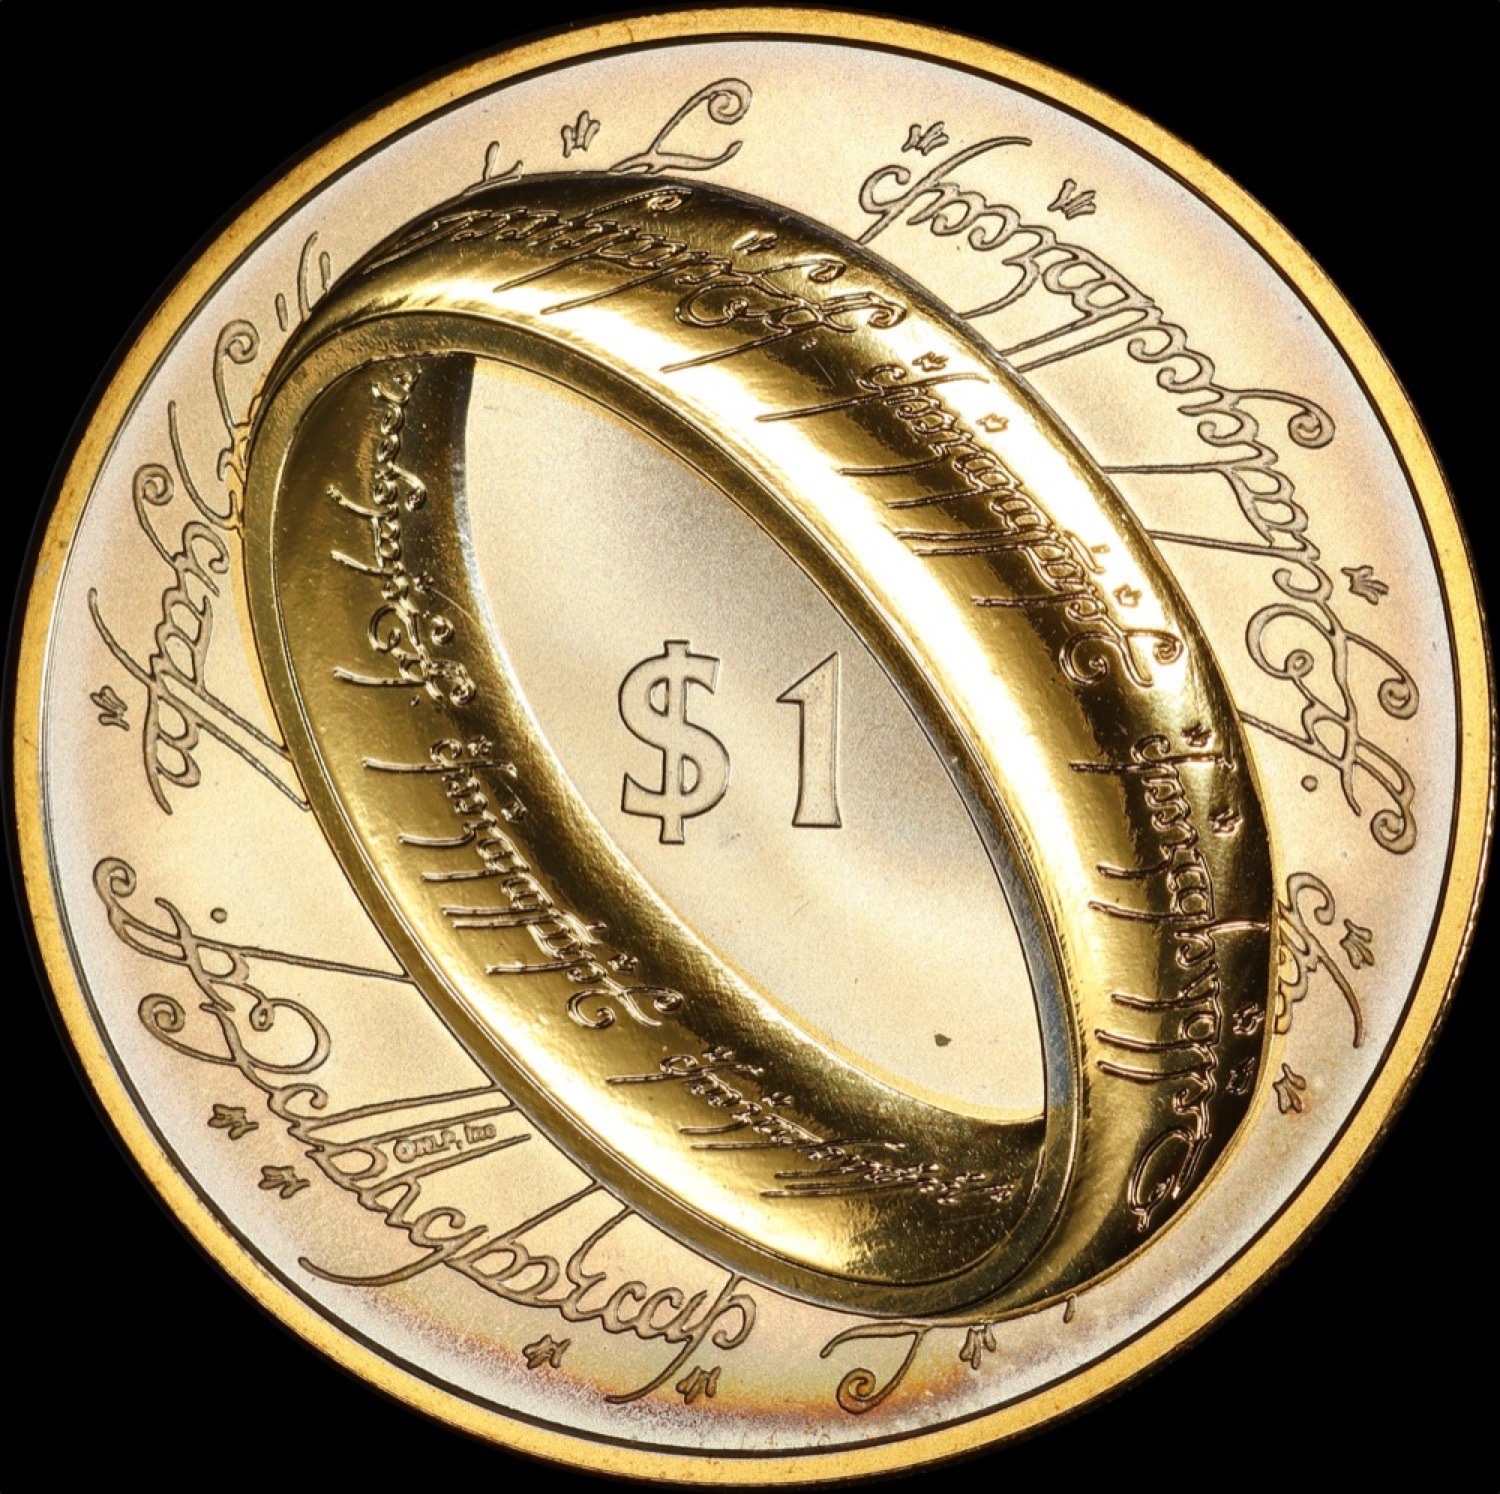 New Zealand 2003 Silver 1 Dollar Lord of the Rings - Ring of Power PCGS PR68DC product image